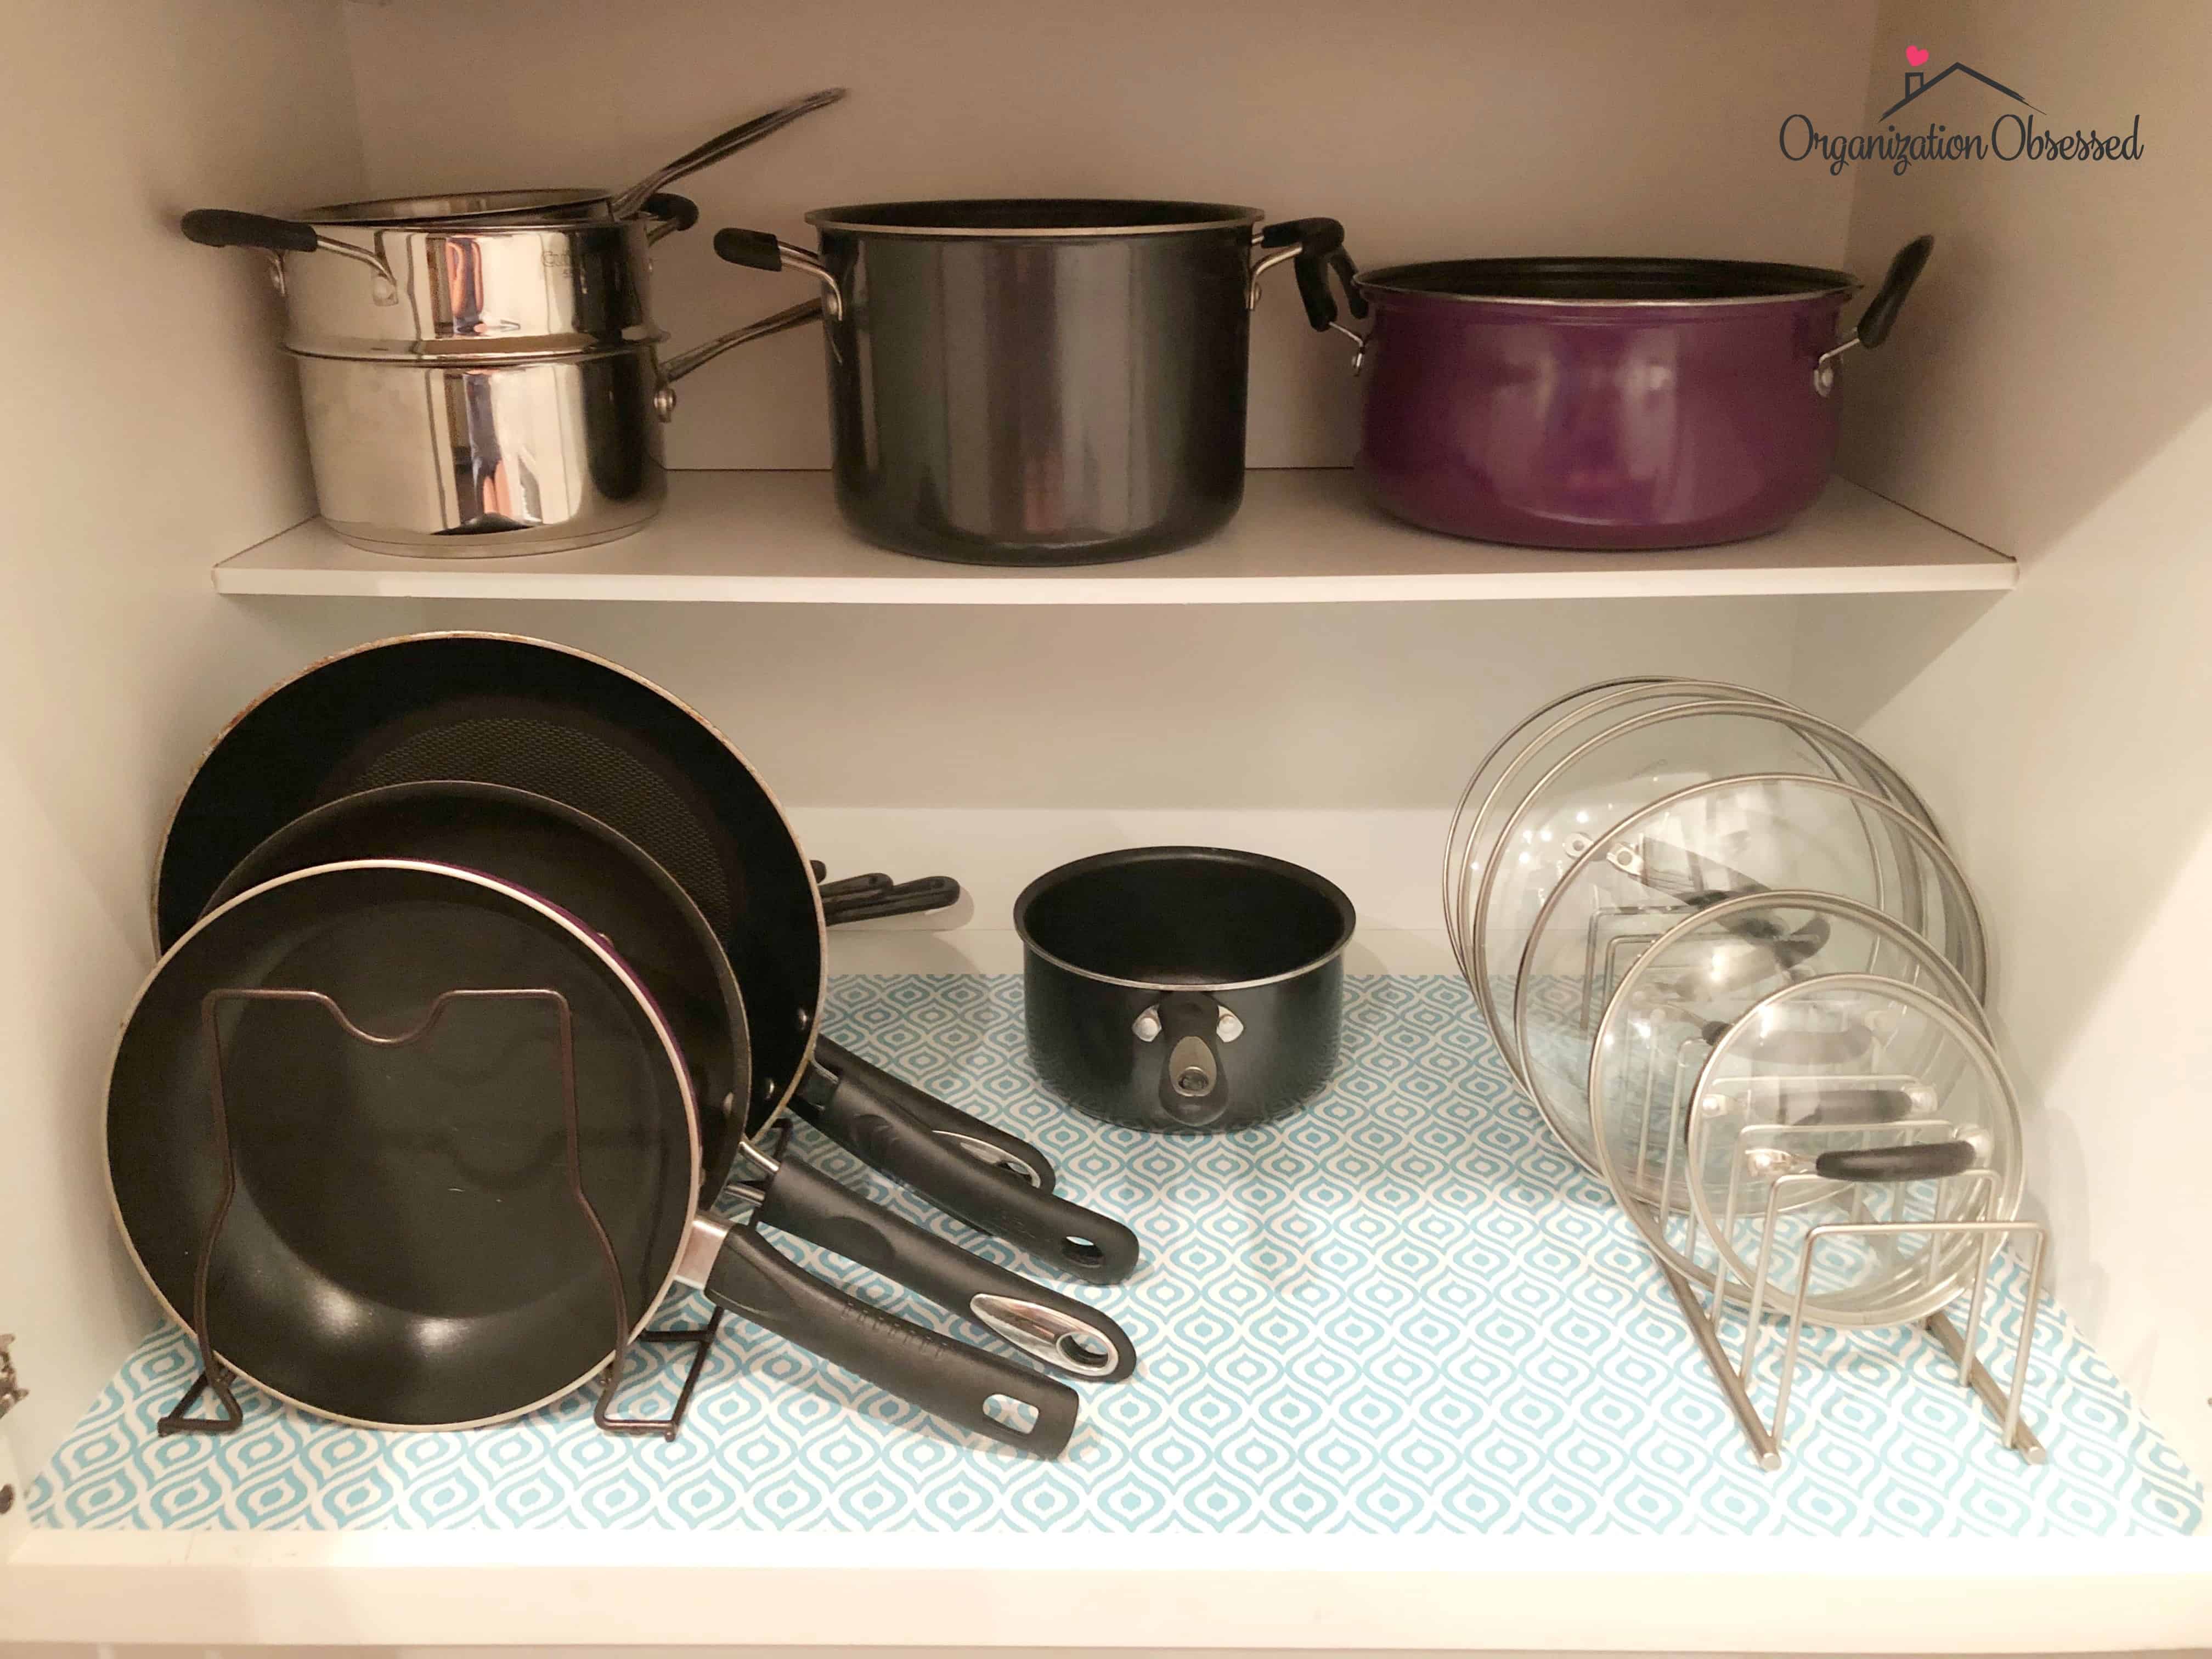 https://www.organizationobsessed.com/wp-content/uploads/2018/07/How-to-organize-pots-and-pans-3.jpg